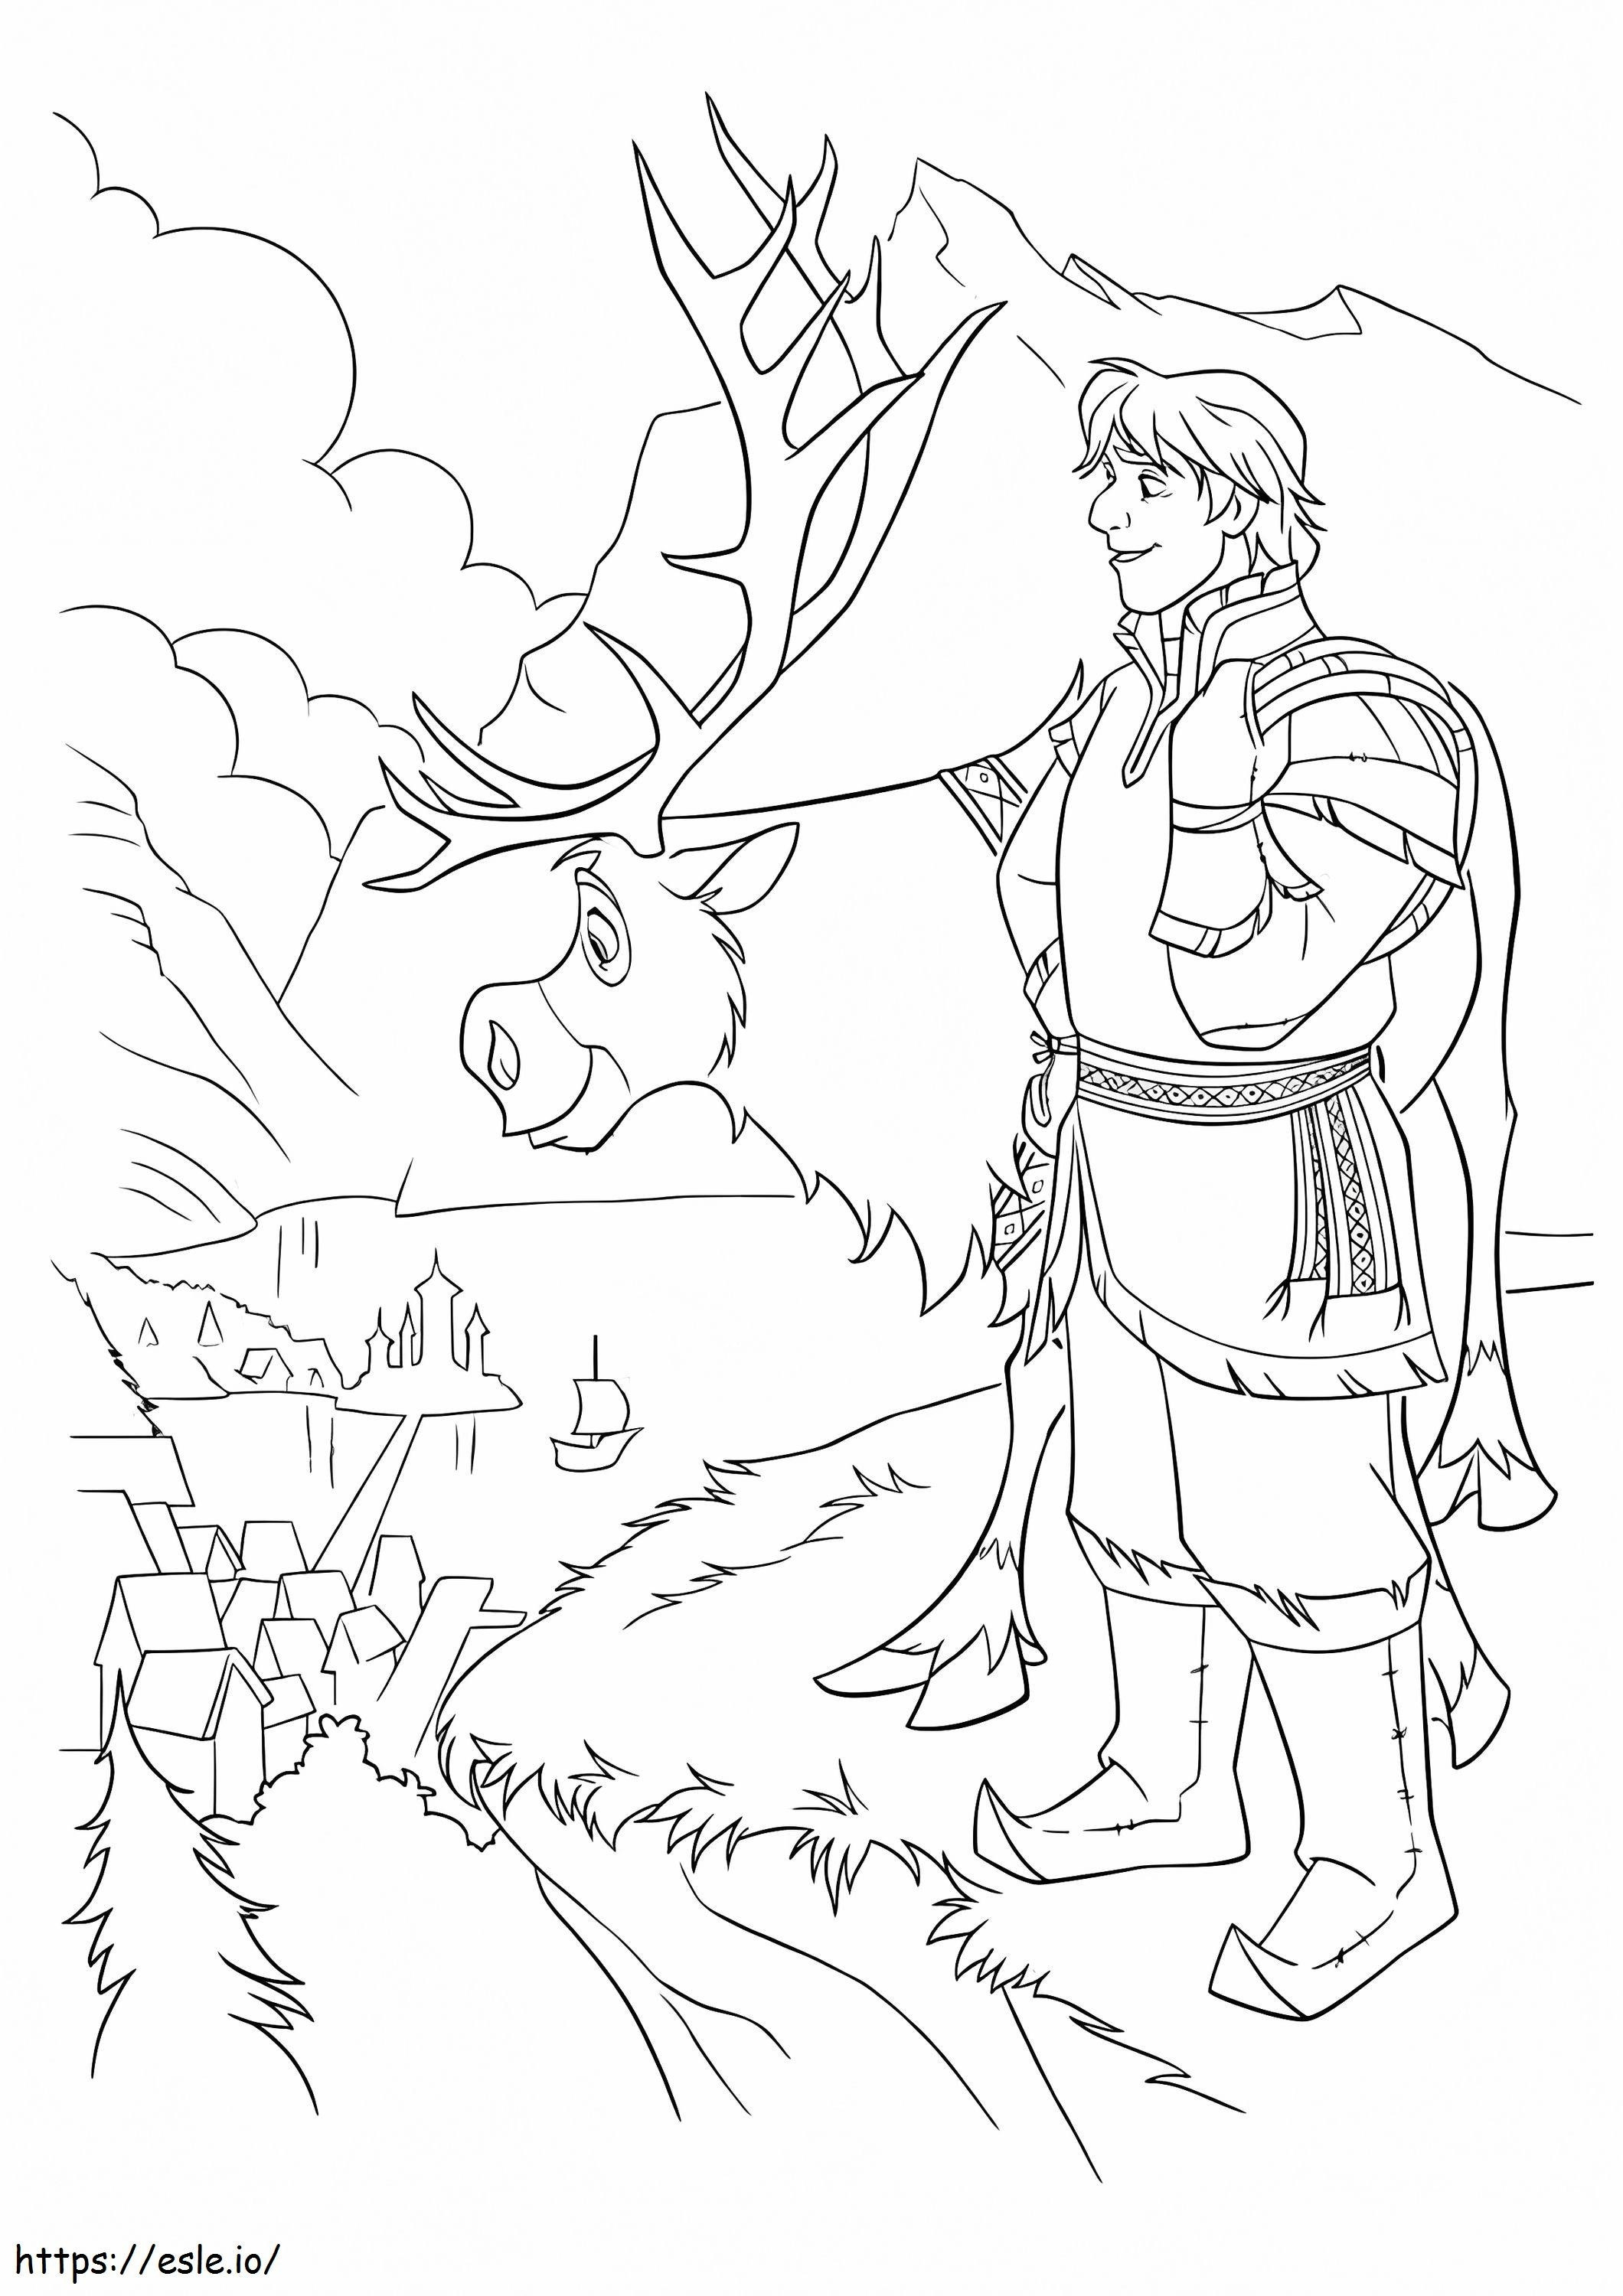 Kristoff And Sven In The Country coloring page